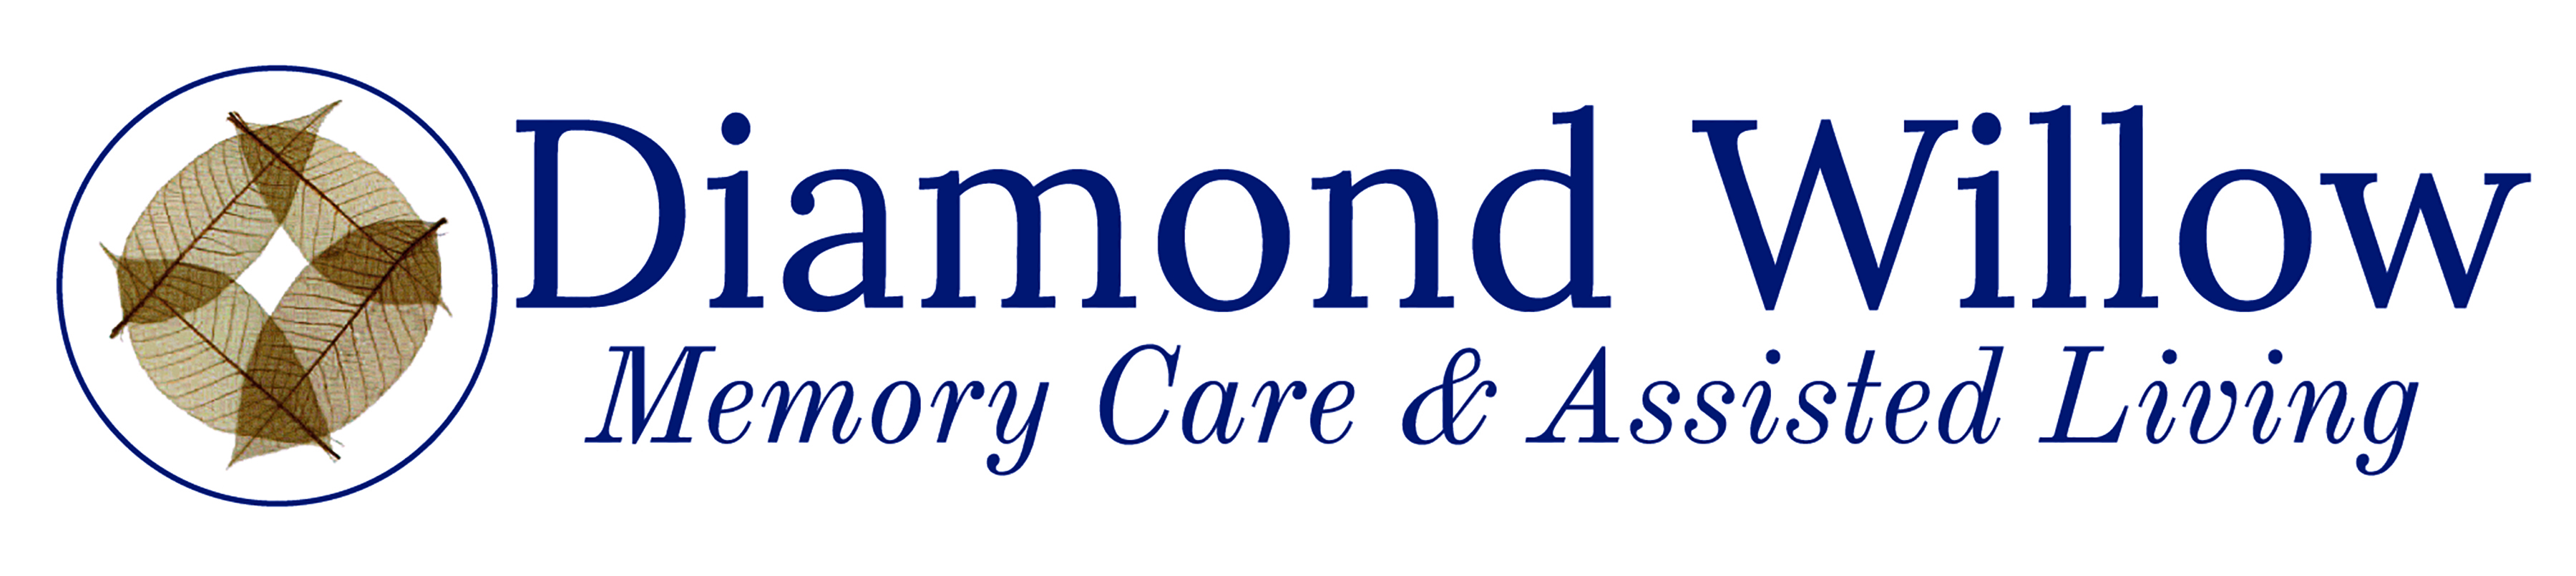 Diamond Willow Assisted Living